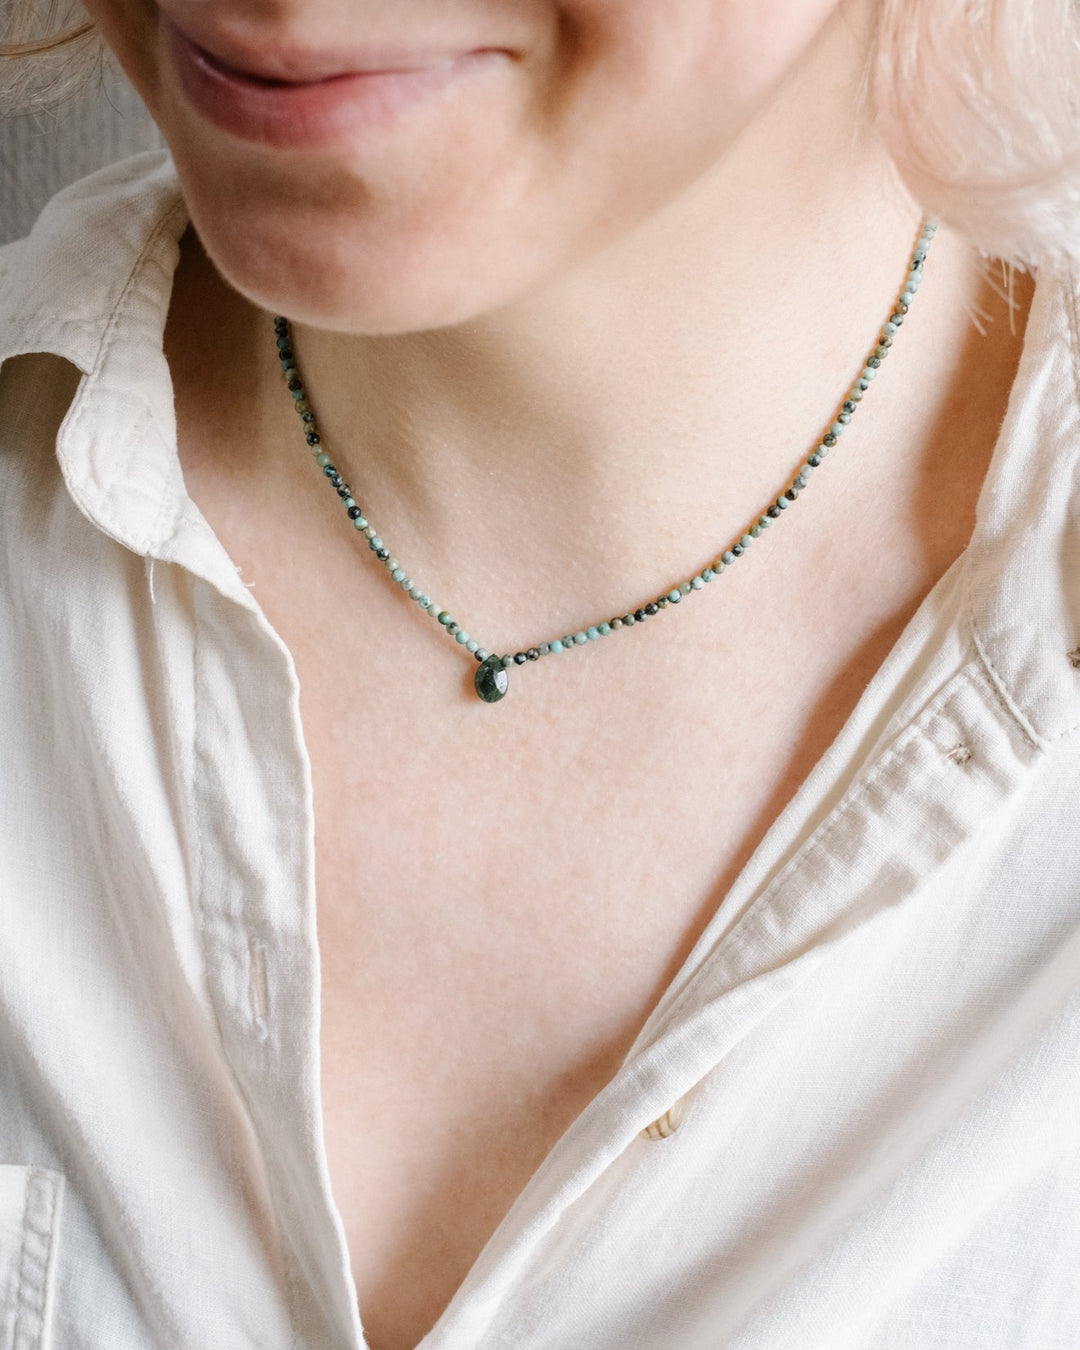 Labradorite Beaded Necklace - The Healing Pear